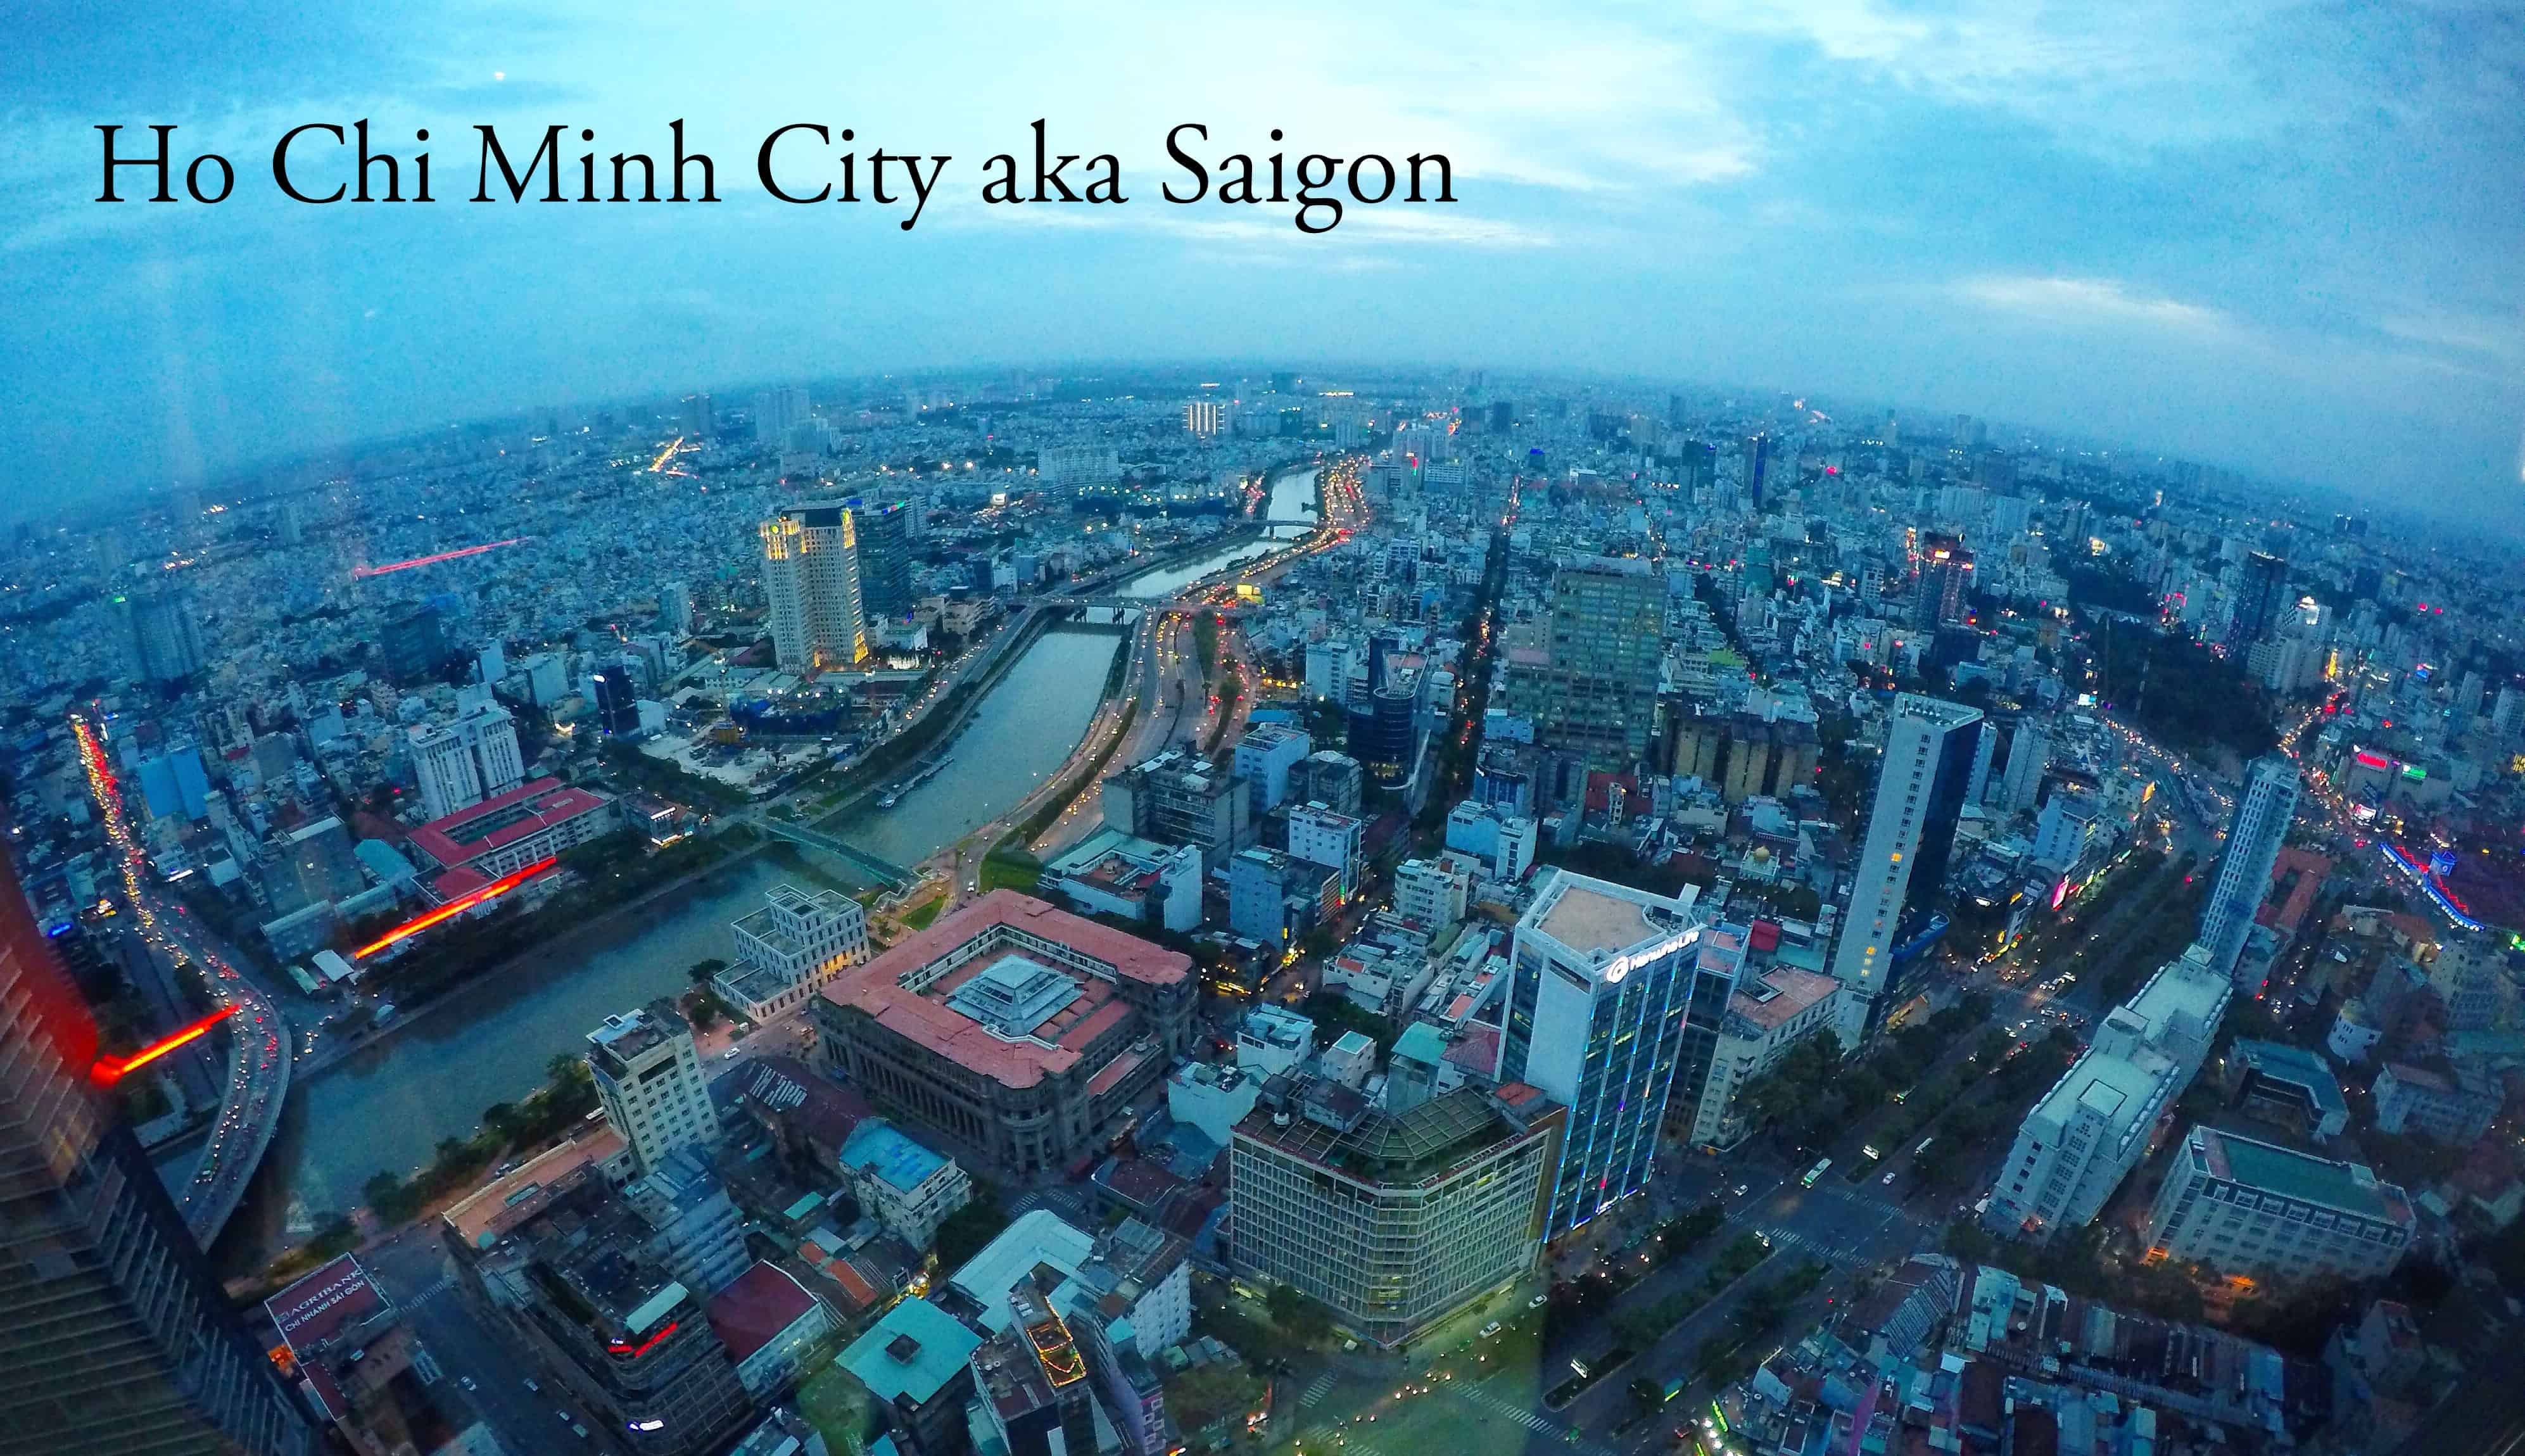 What You Should Not Miss When In Ho Chi Minh City AKA Saigon